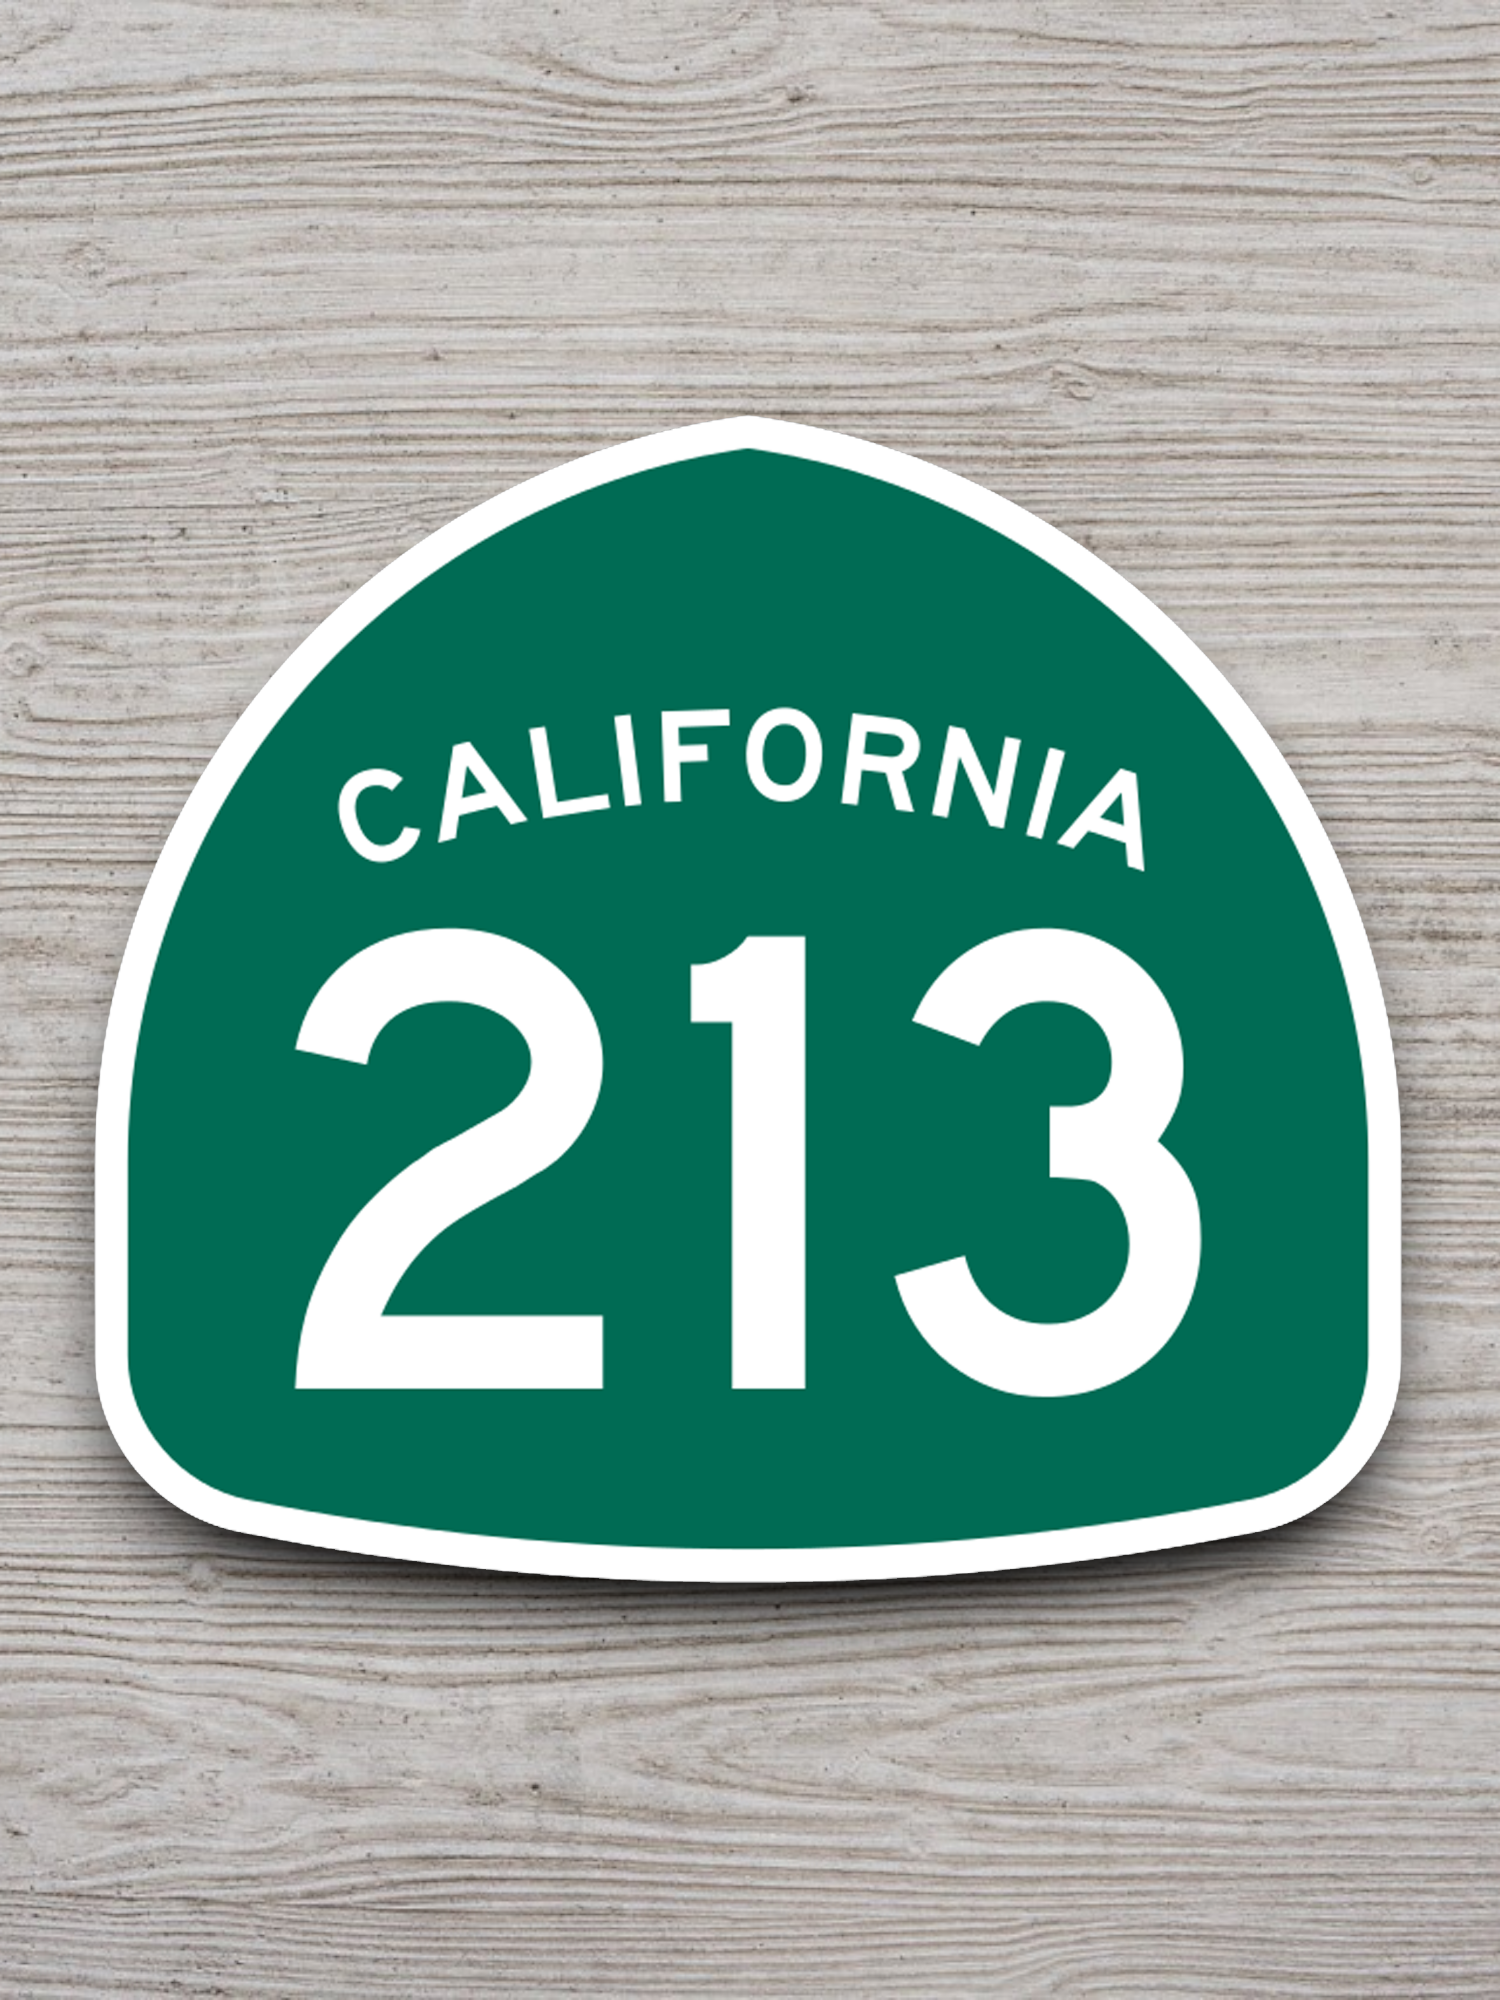 California State Route 213 Road Sign Sticker